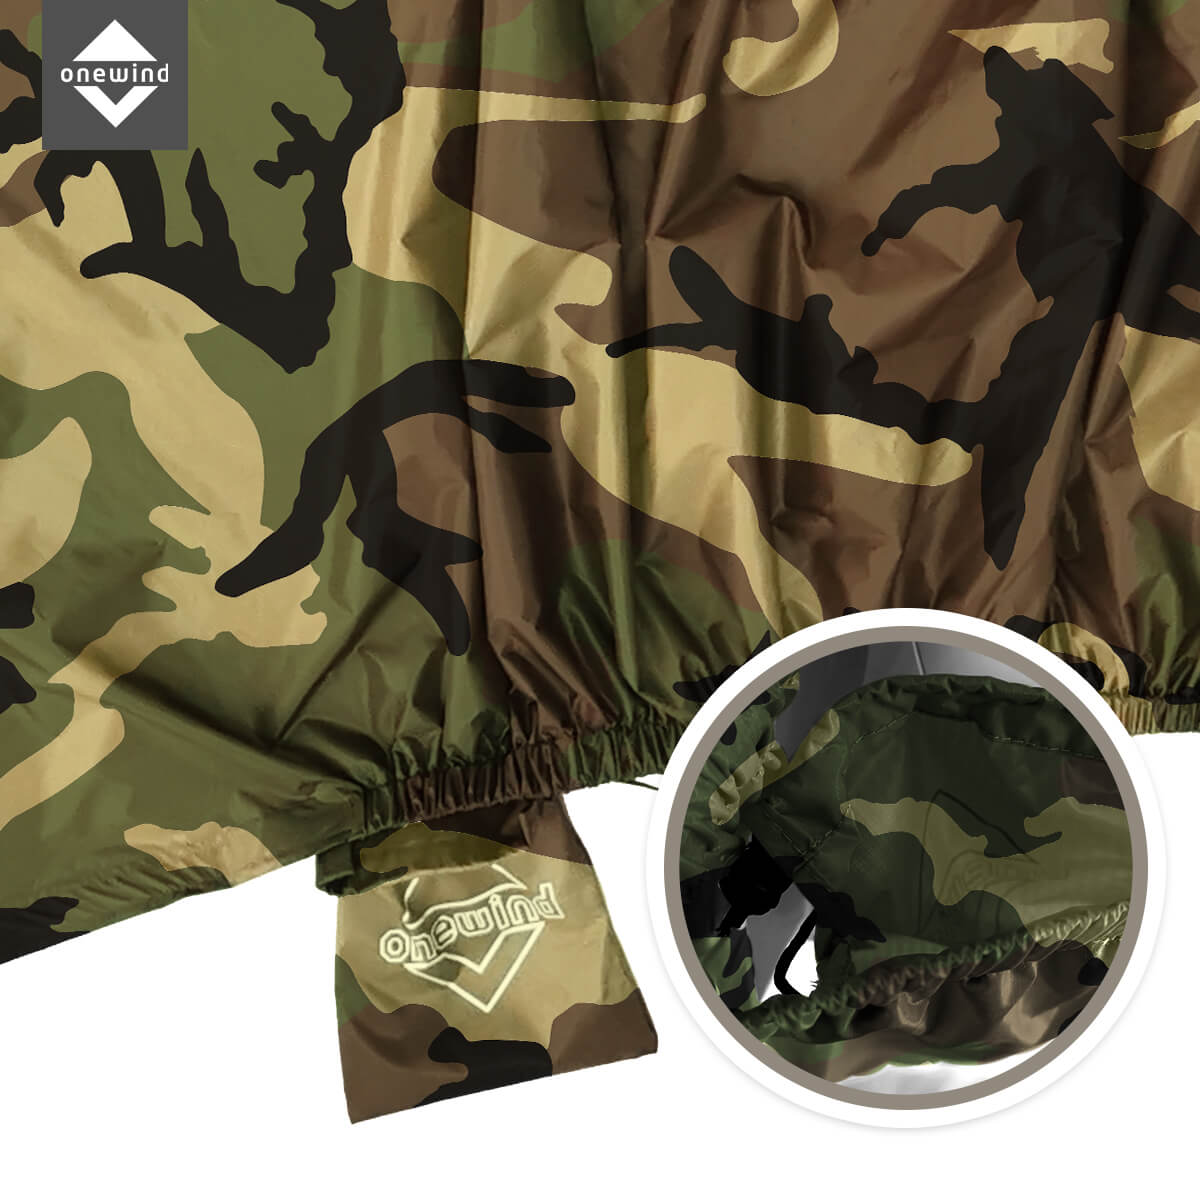 Camouflage | Onewind Outdoors